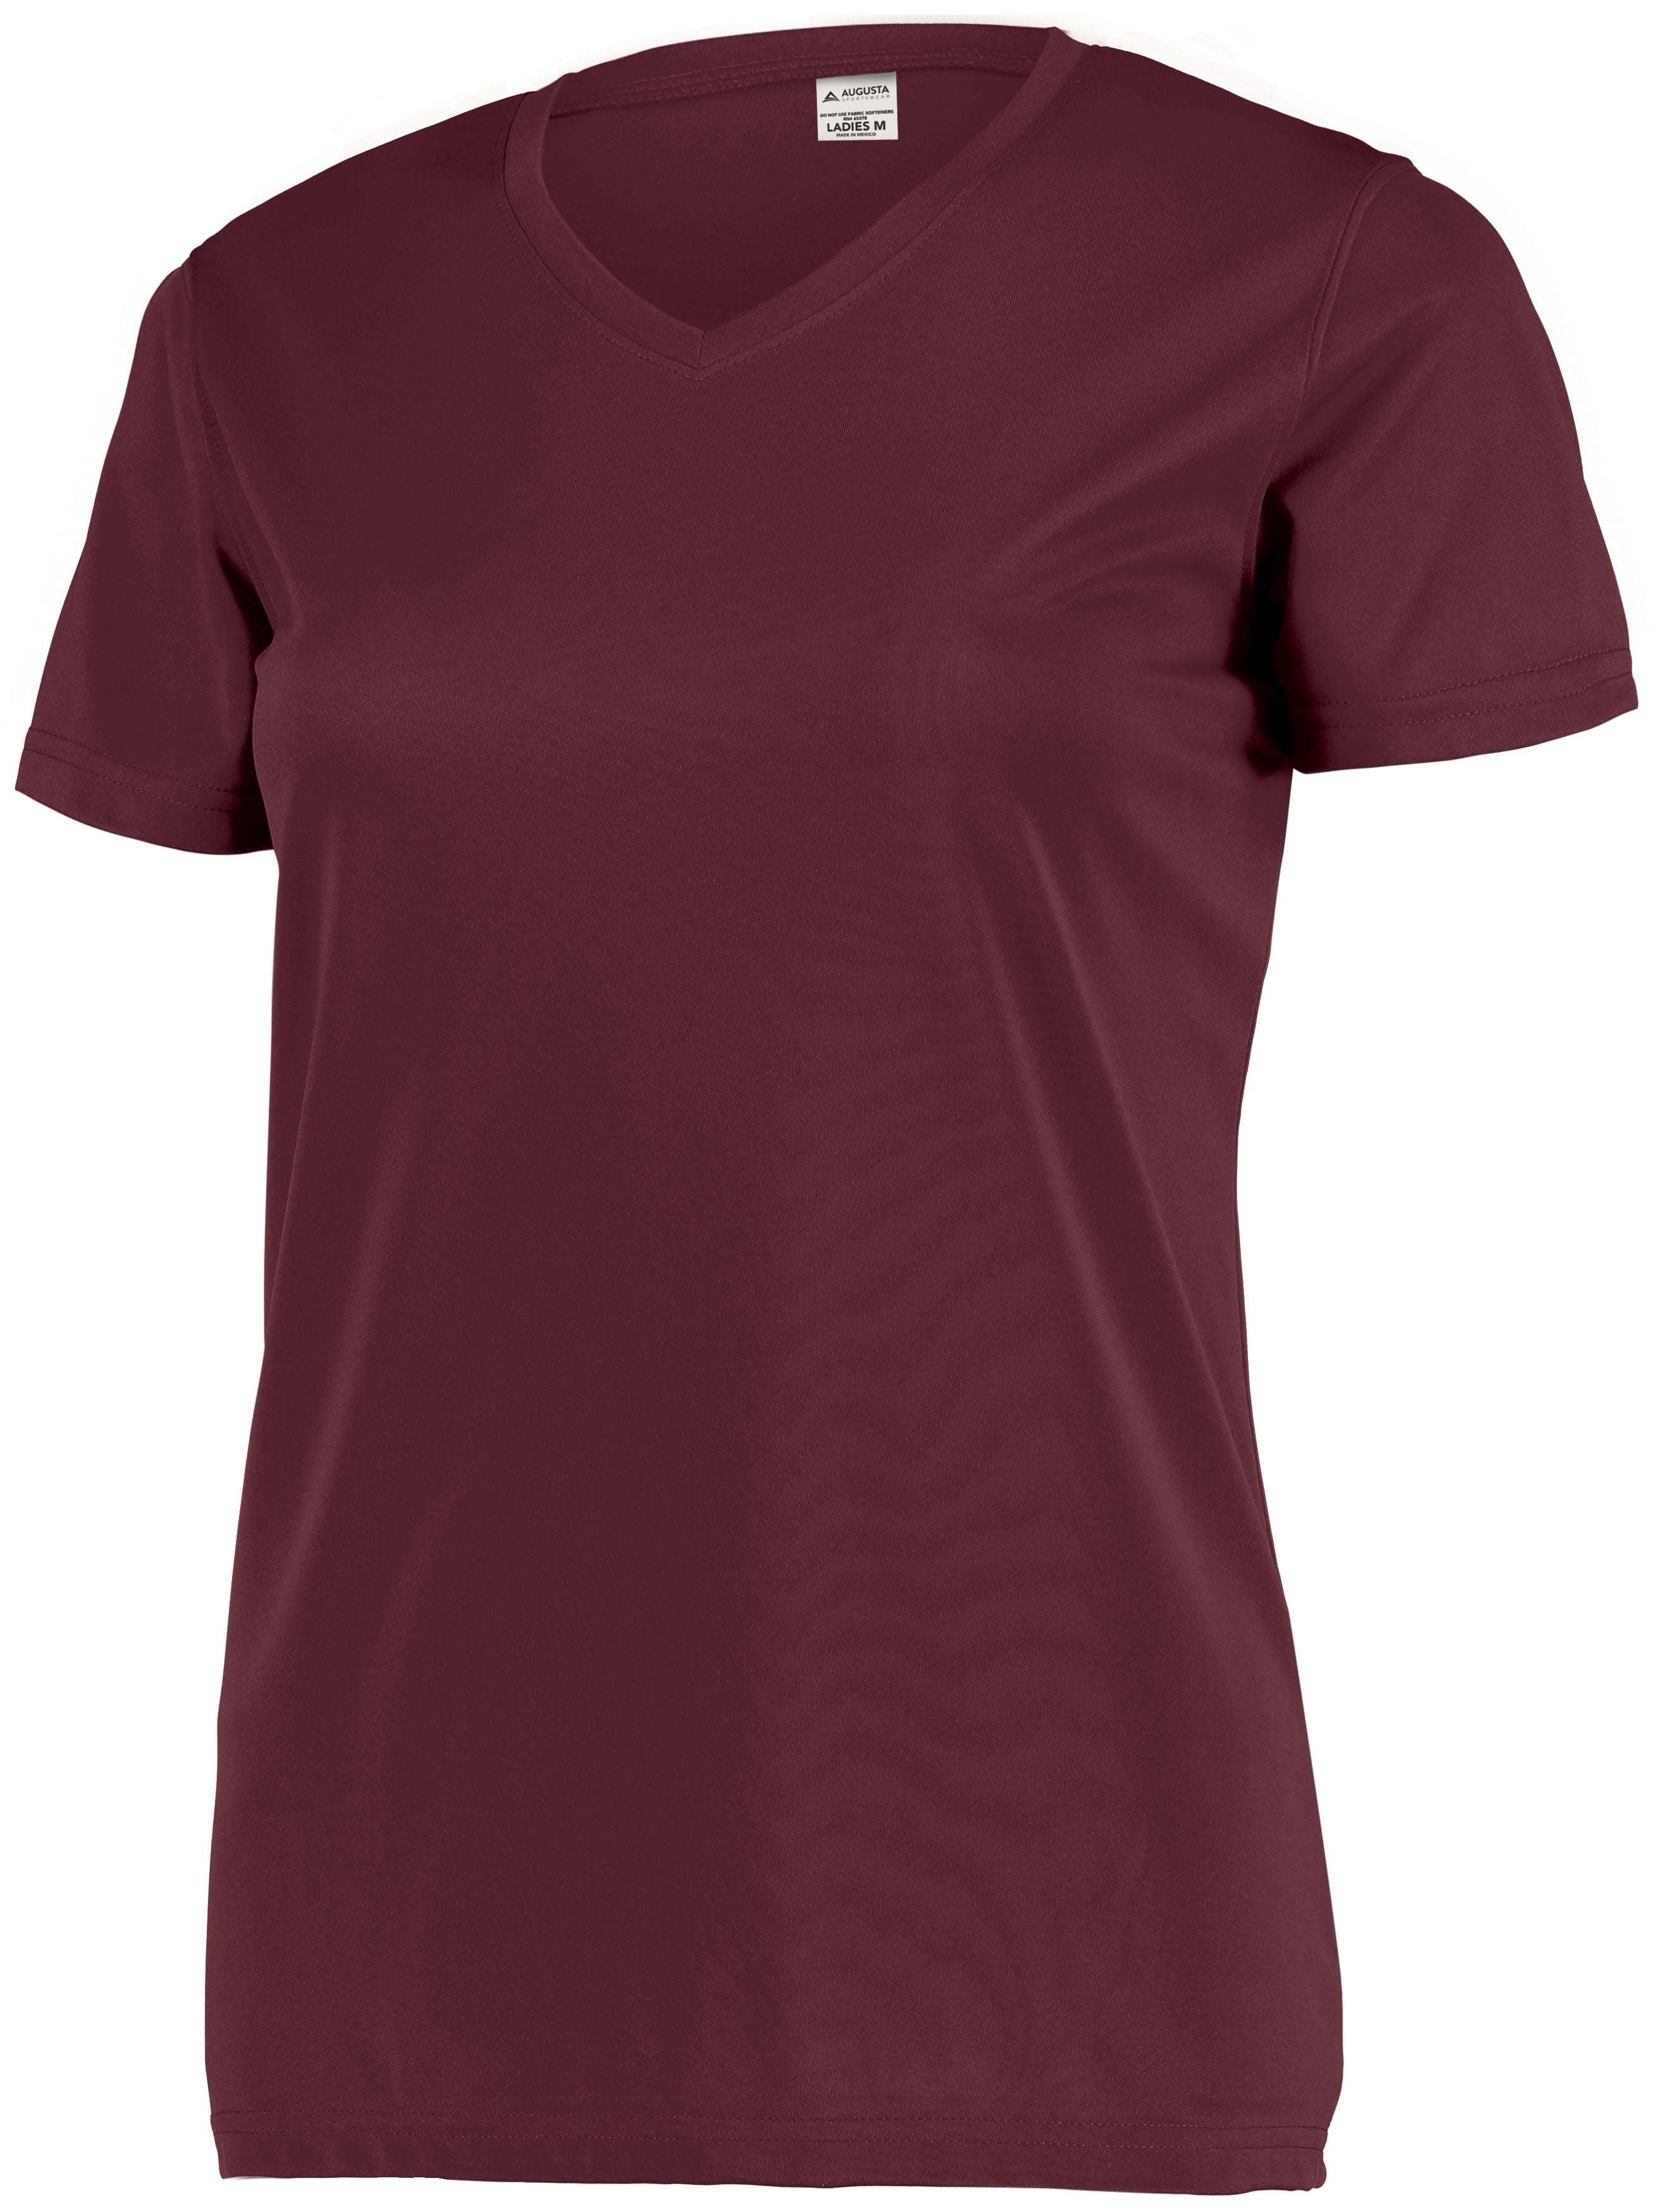 Augusta Sportswear Ladies Attain Wicking Set-In Sleeve Tee in Maroon (Hlw)  -Part of the Ladies, Ladies-Tee-Shirt, T-Shirts, Augusta-Products, Shirts product lines at KanaleyCreations.com